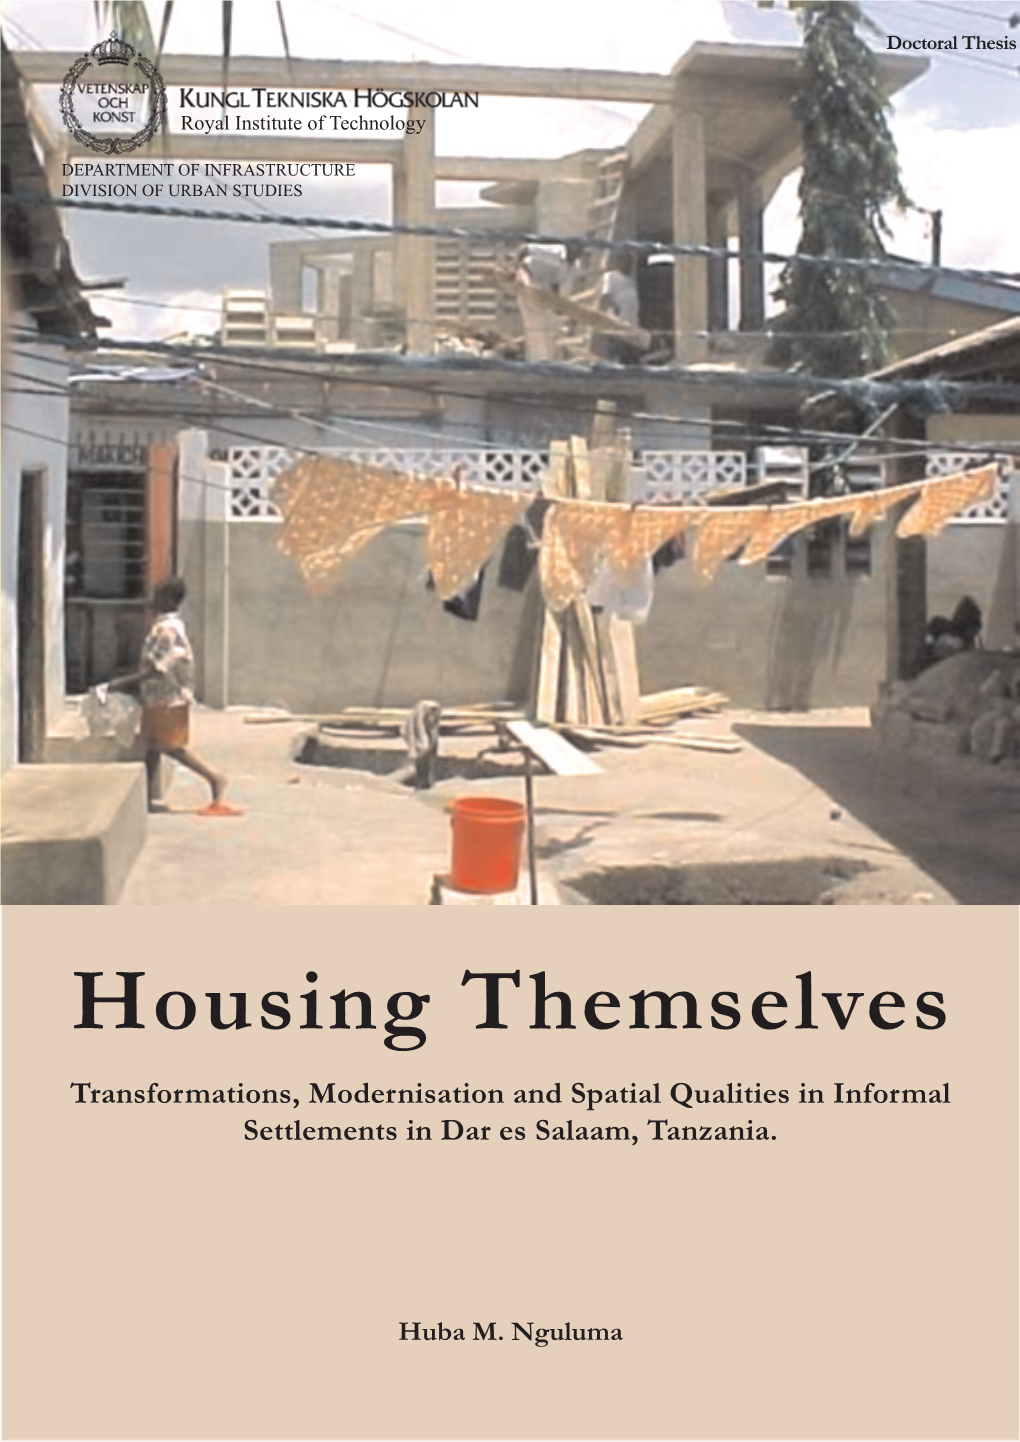 Housing Themselves Transformations, Modernisation and Spatial Qualities in Informal Settlements in Dar Es Salaam, Tanzania